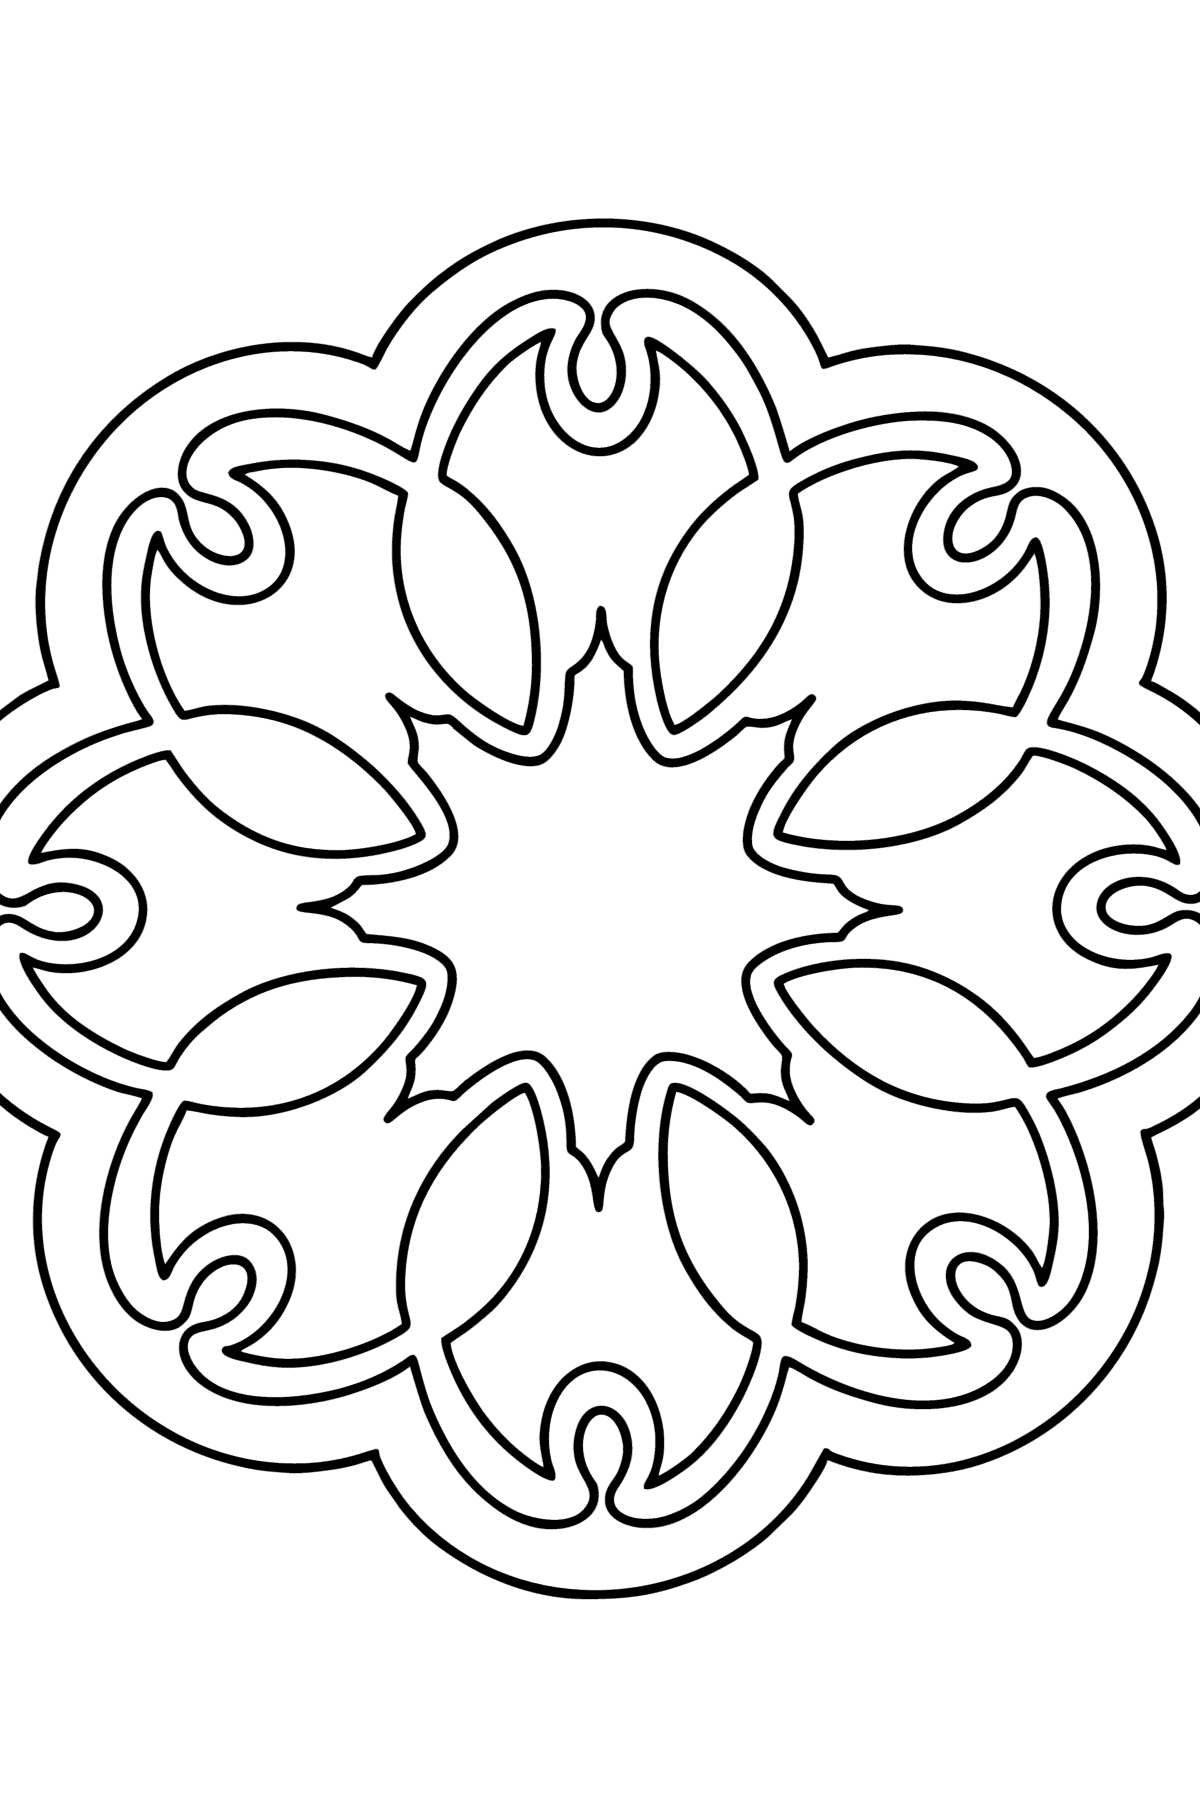 Mandala coloring page - 4 elements - Coloring Pages for Kids